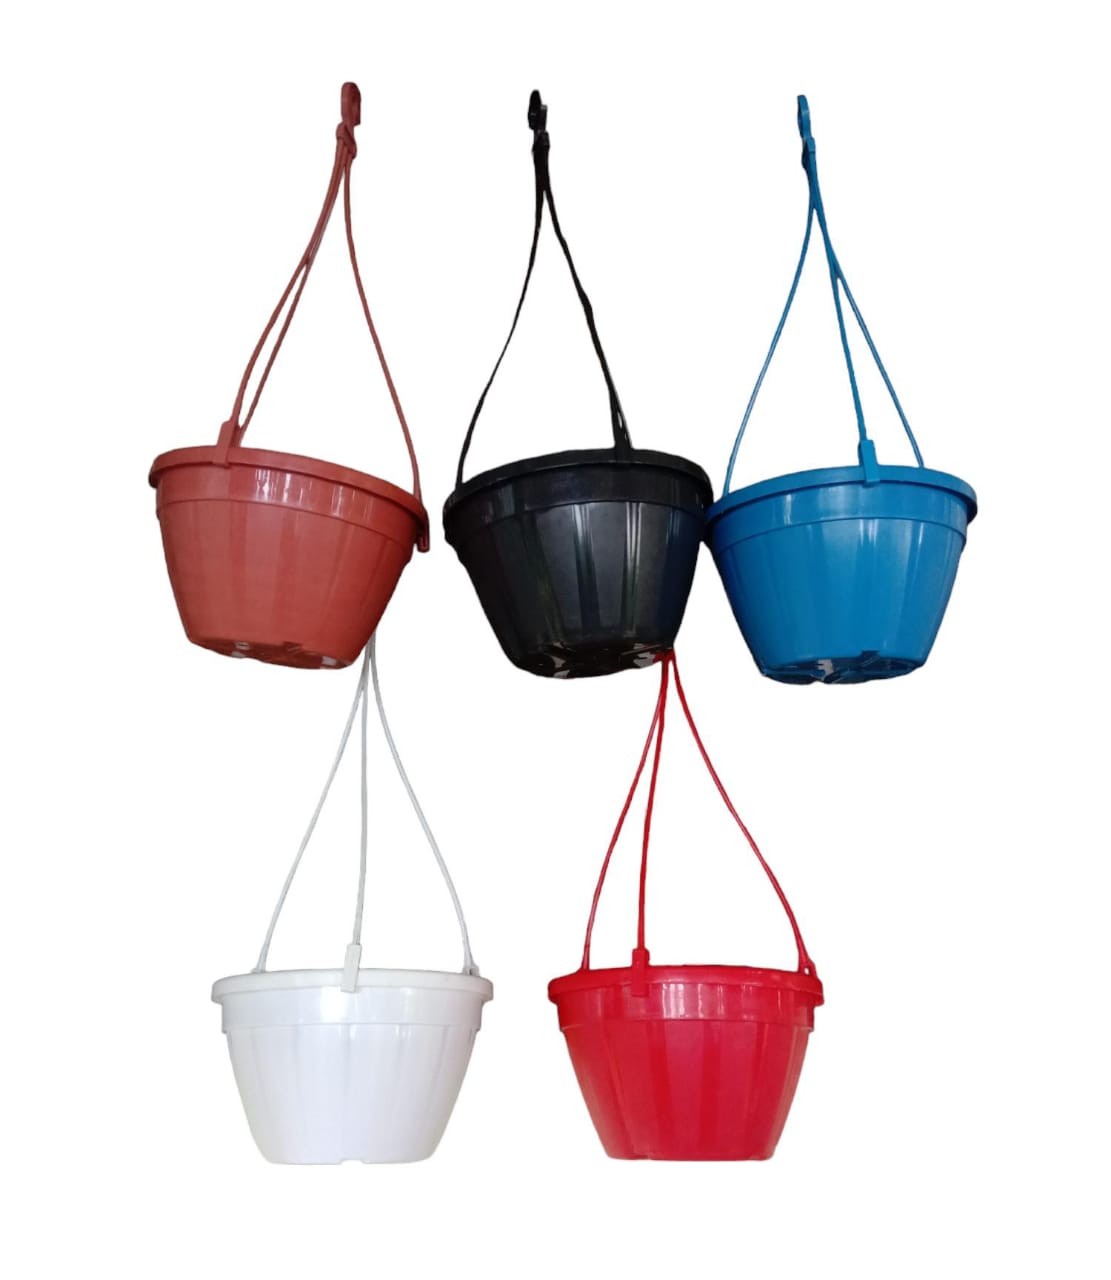 KUMUDAM Hanging Plant Pots (Multicolor) Pack of 5| Decorative Pots for Balcony and Home